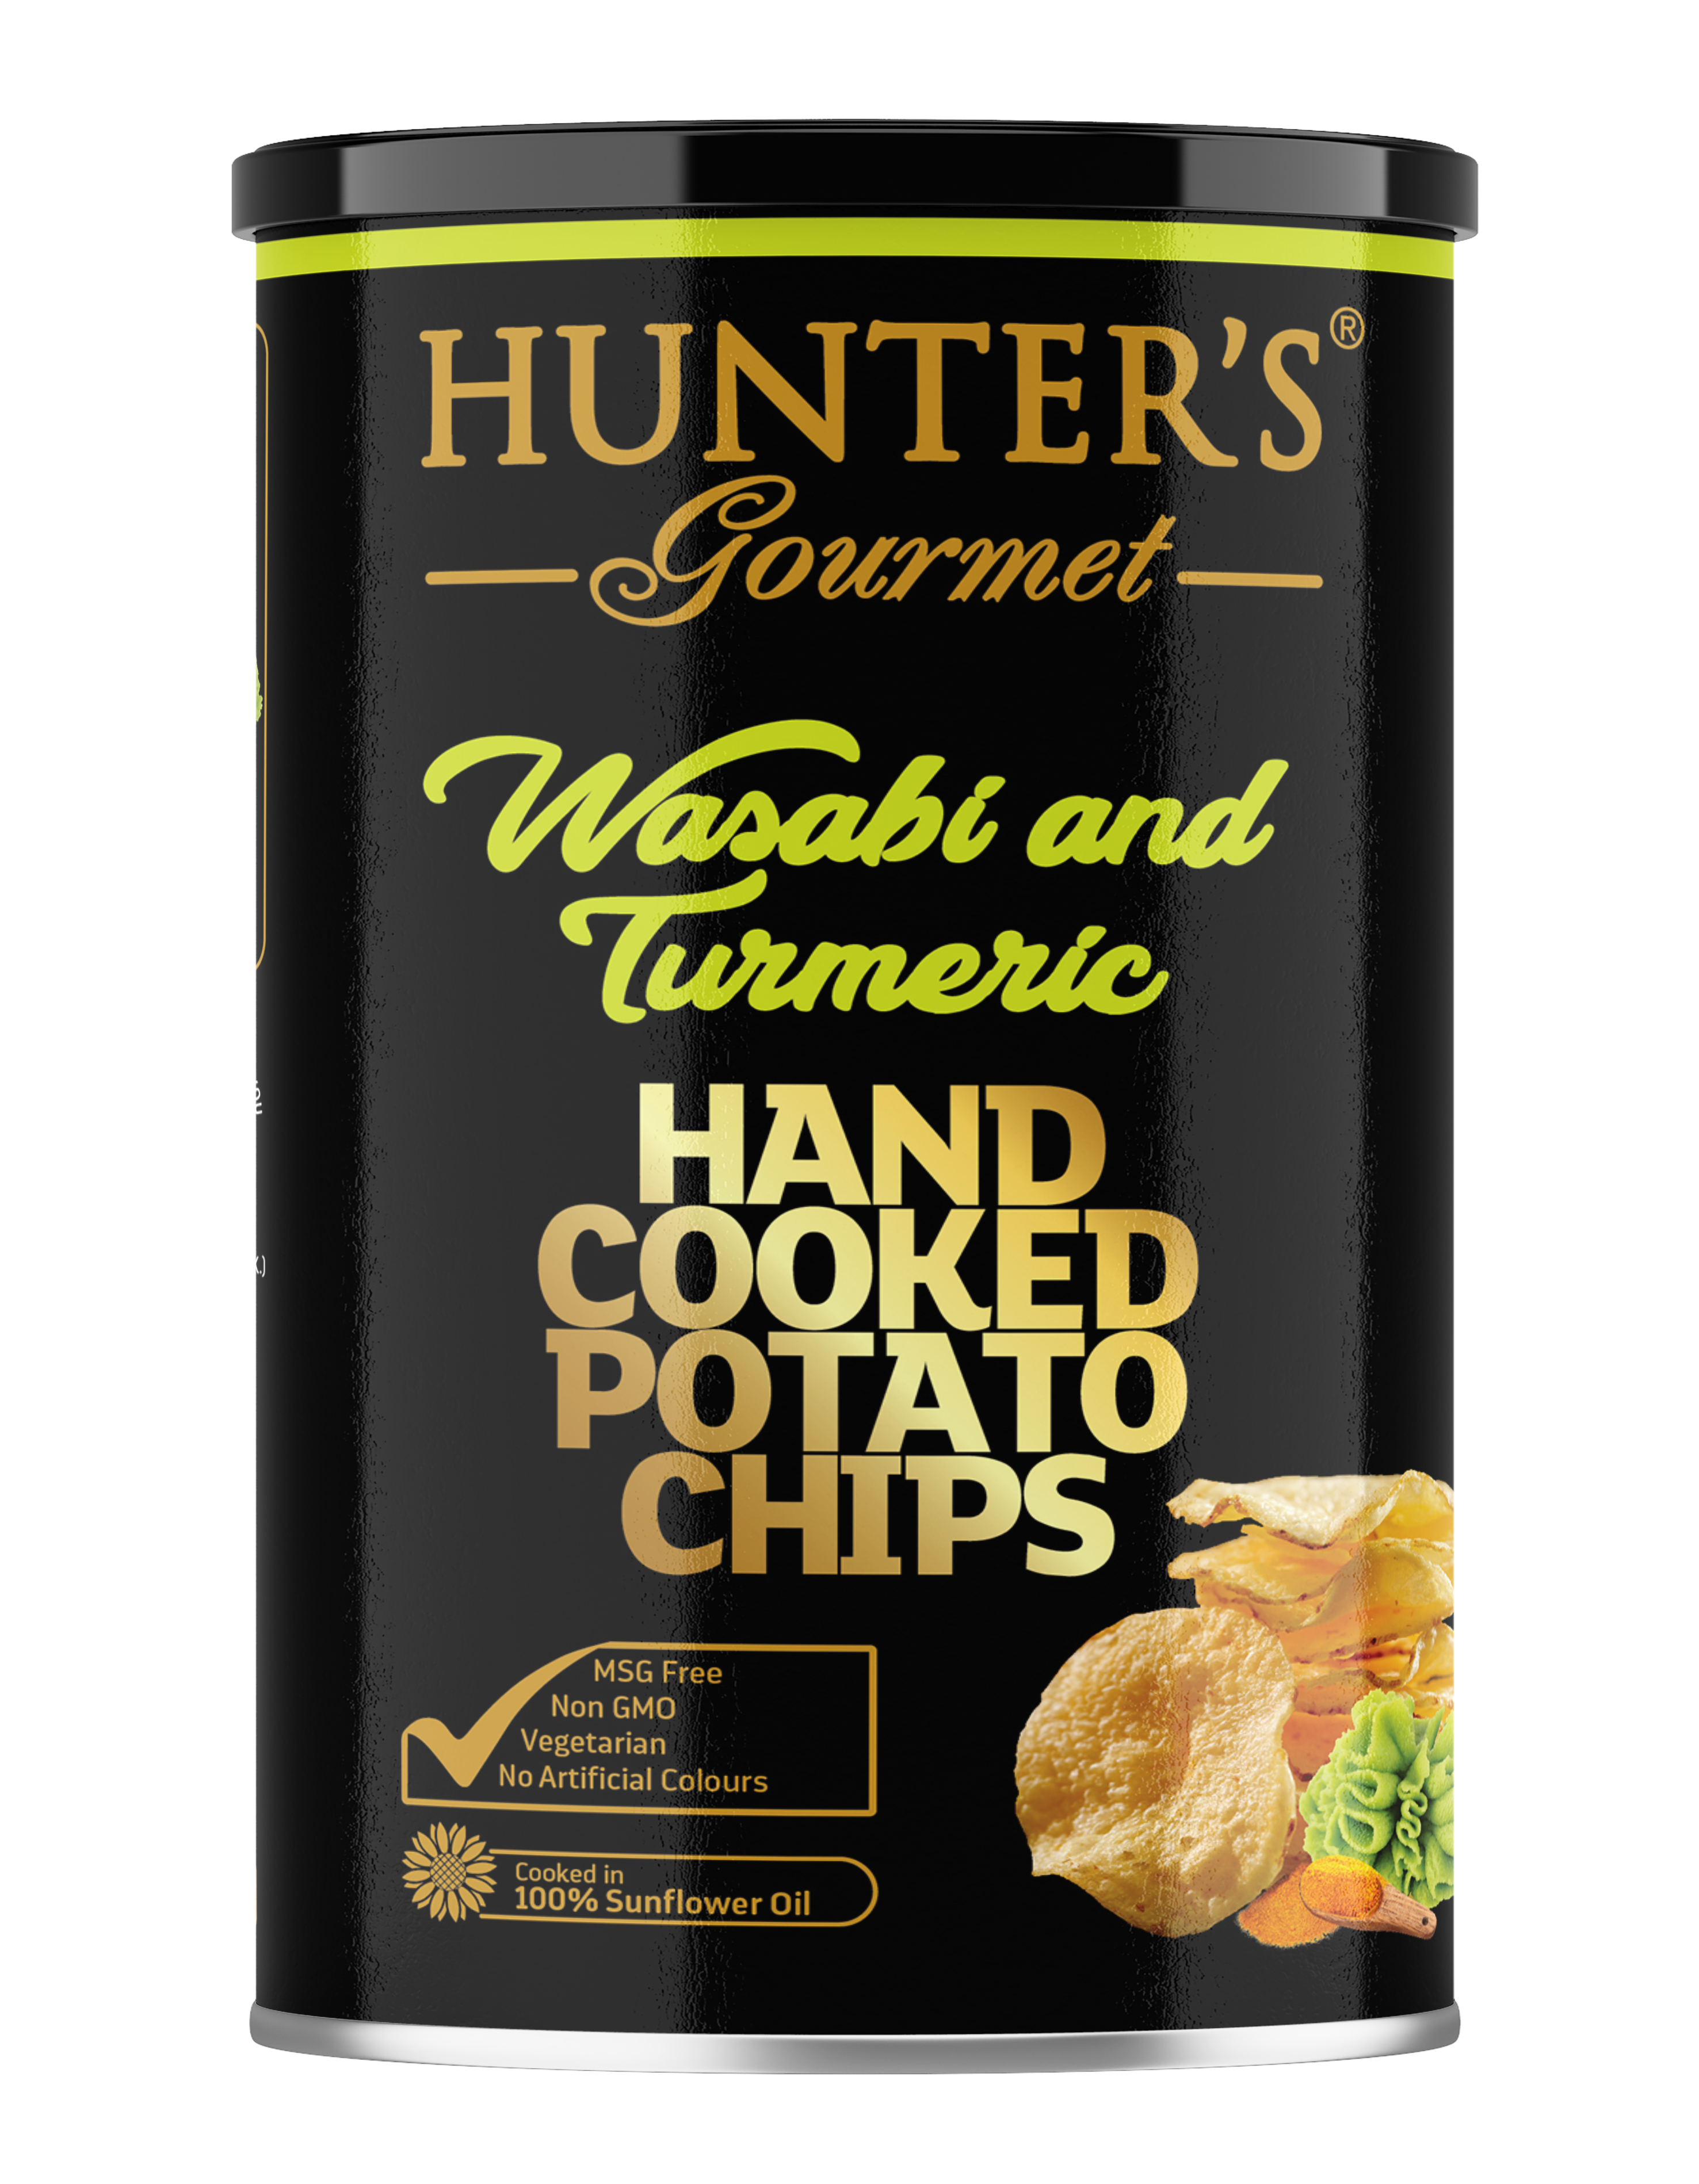 Hunter's Gourmet Hand Cooked Potato Chips Wasabi and Turmeric 12 units per case 150 g